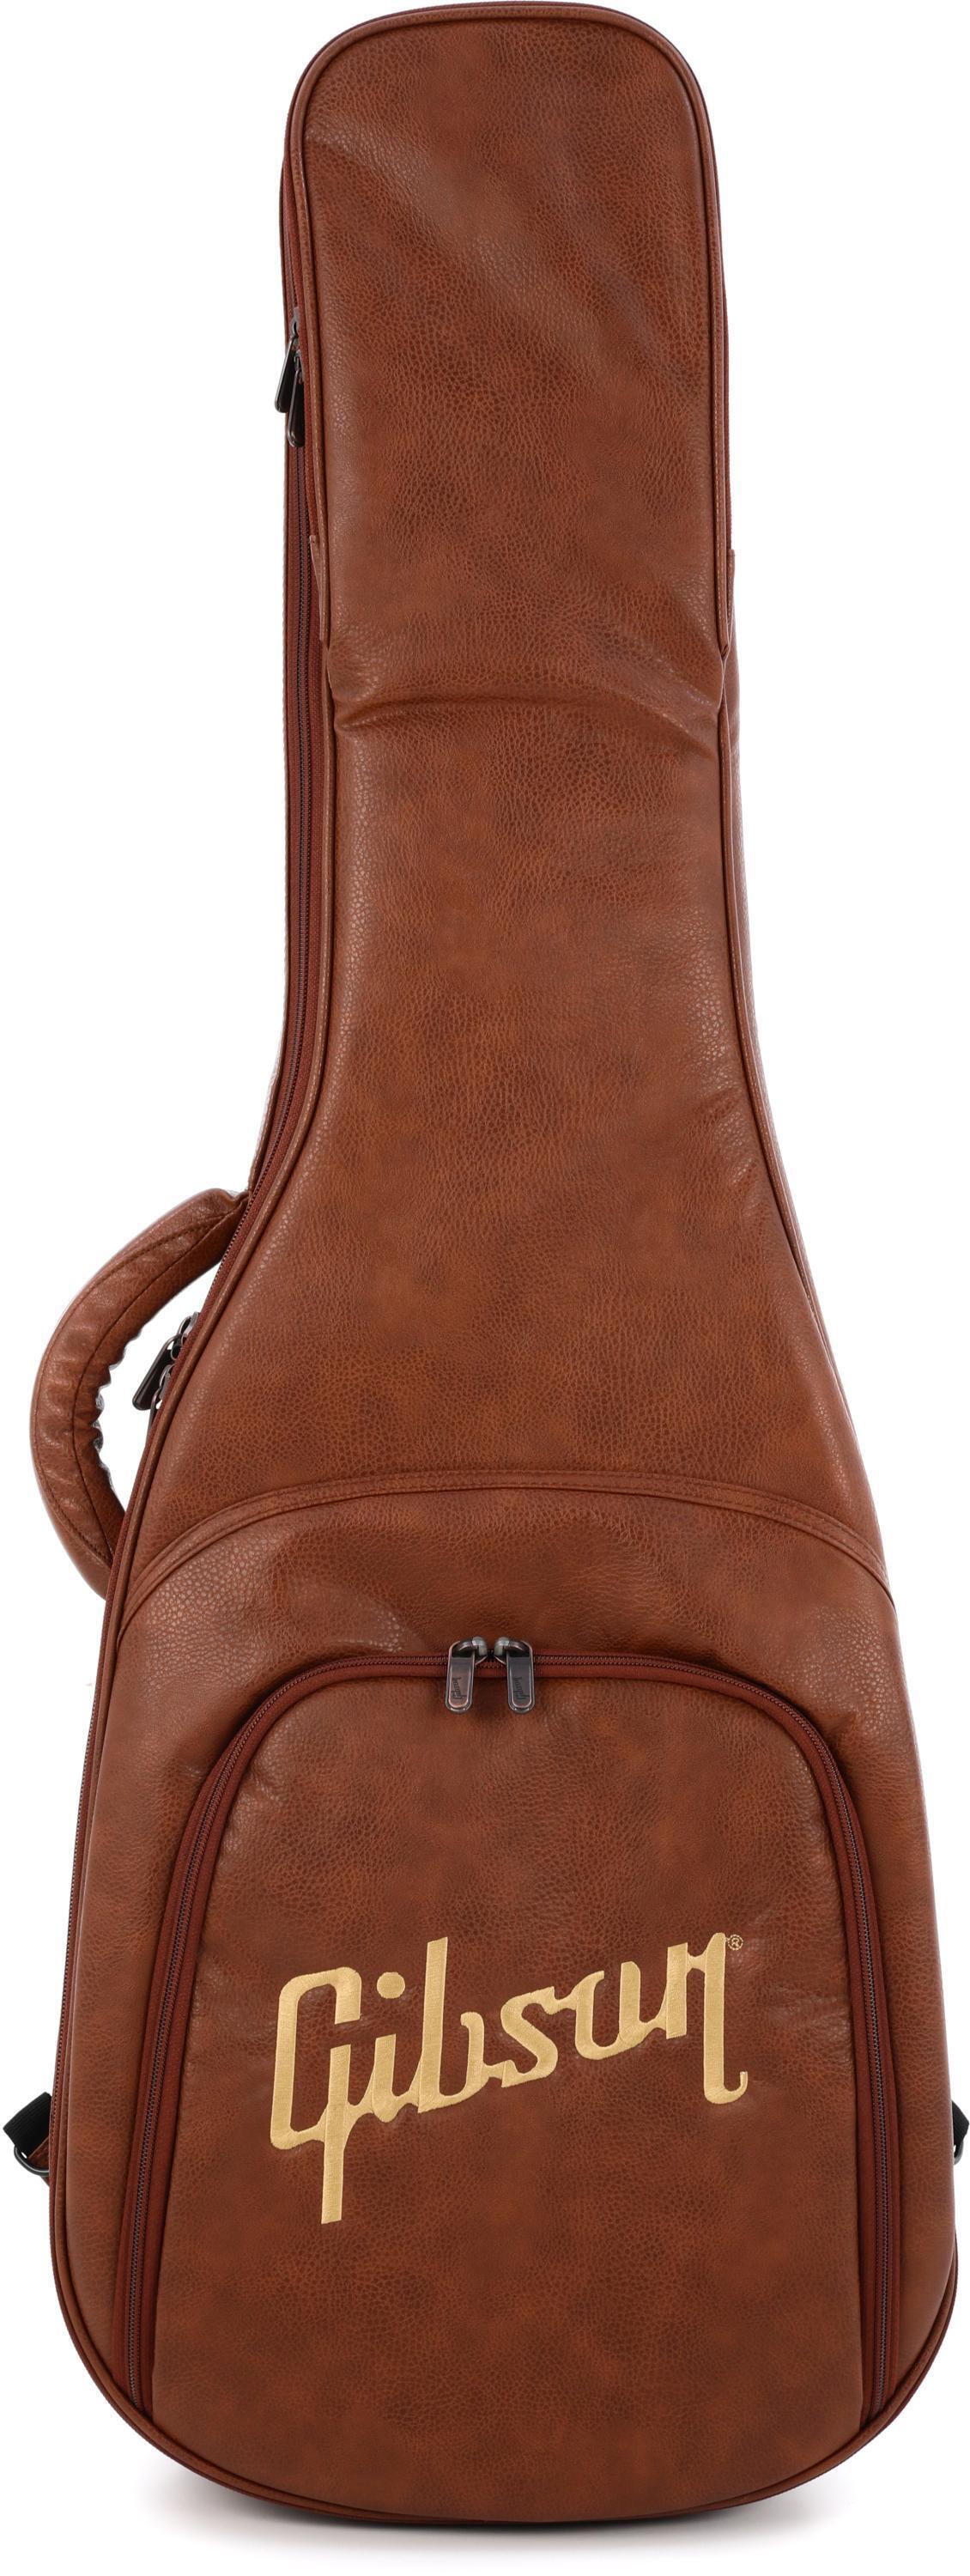 Gibson Accessories Premium Softcase - Brown | Sweetwater